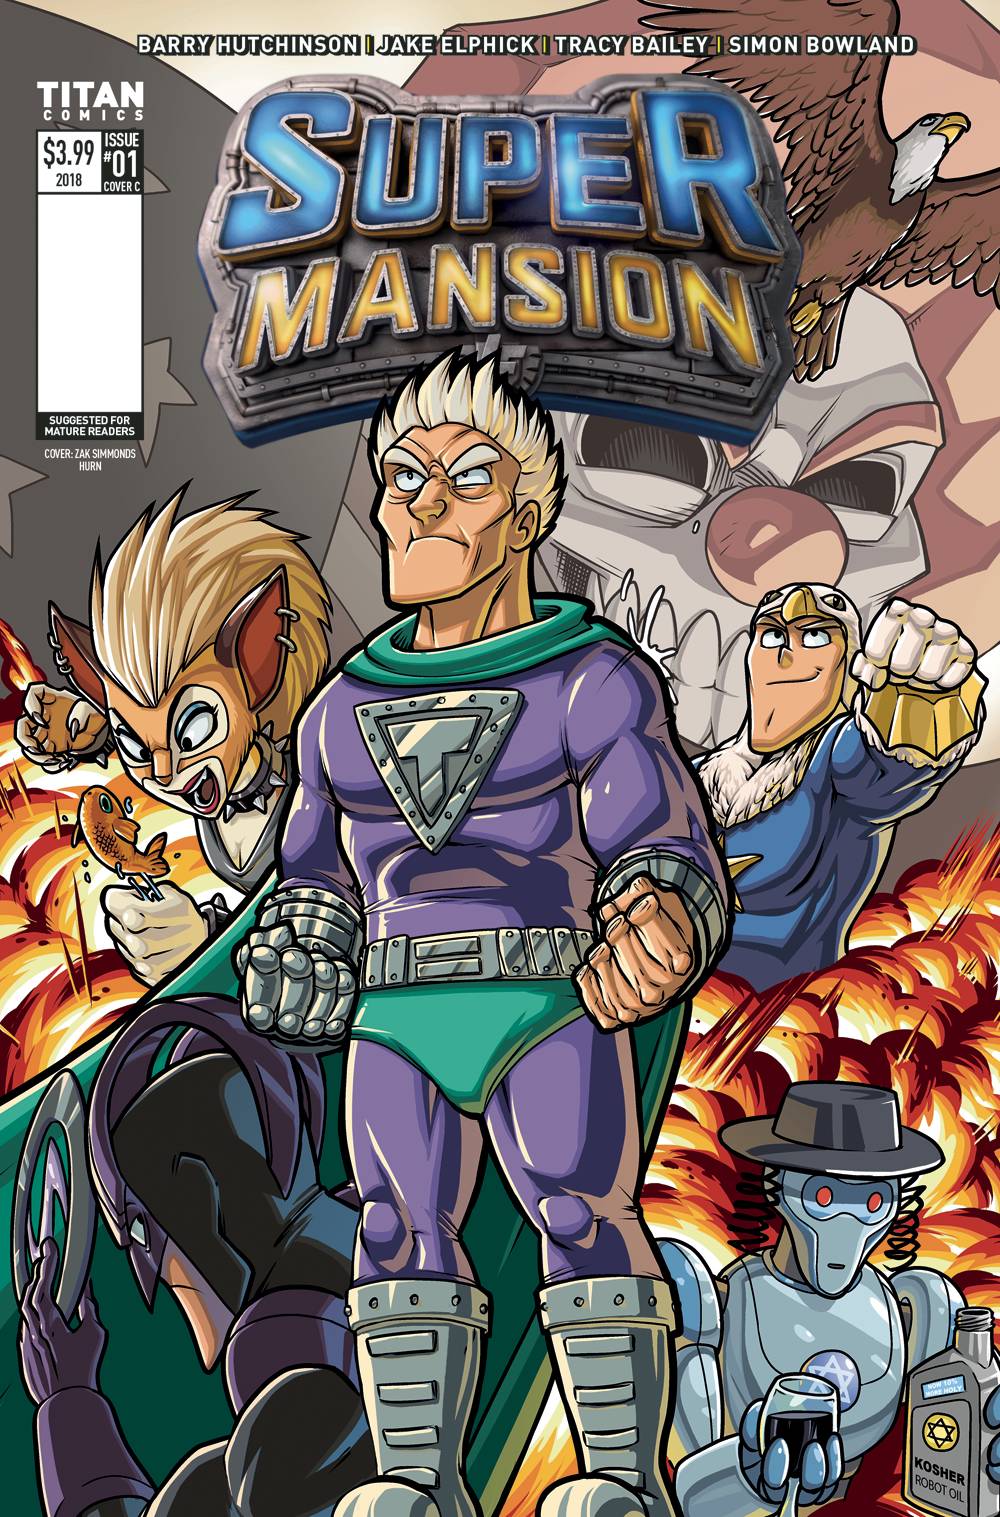 Supermansion #1 Cover C Hurn (Mature) (Of 4)